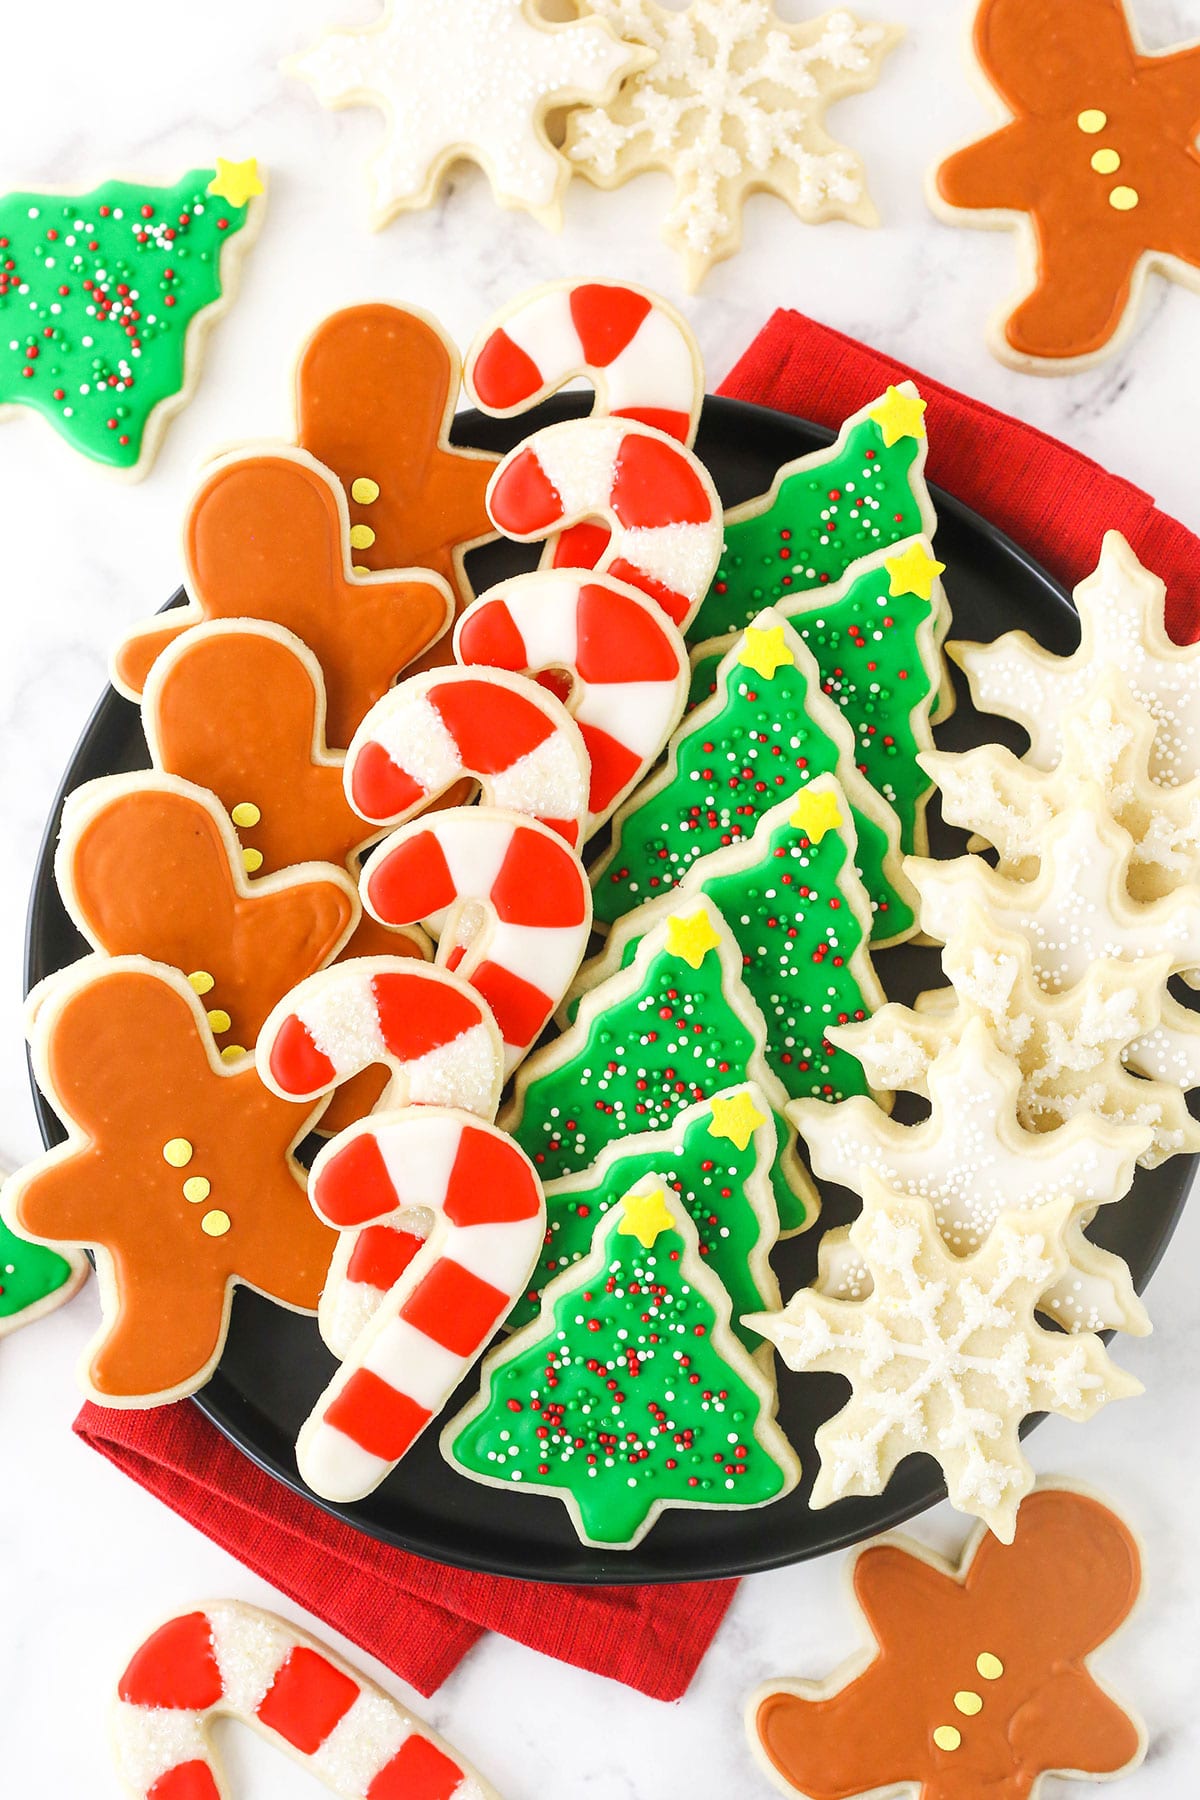 A plate full of neatly organized cut-out sugar cookies with a cloth napkin underneath it.